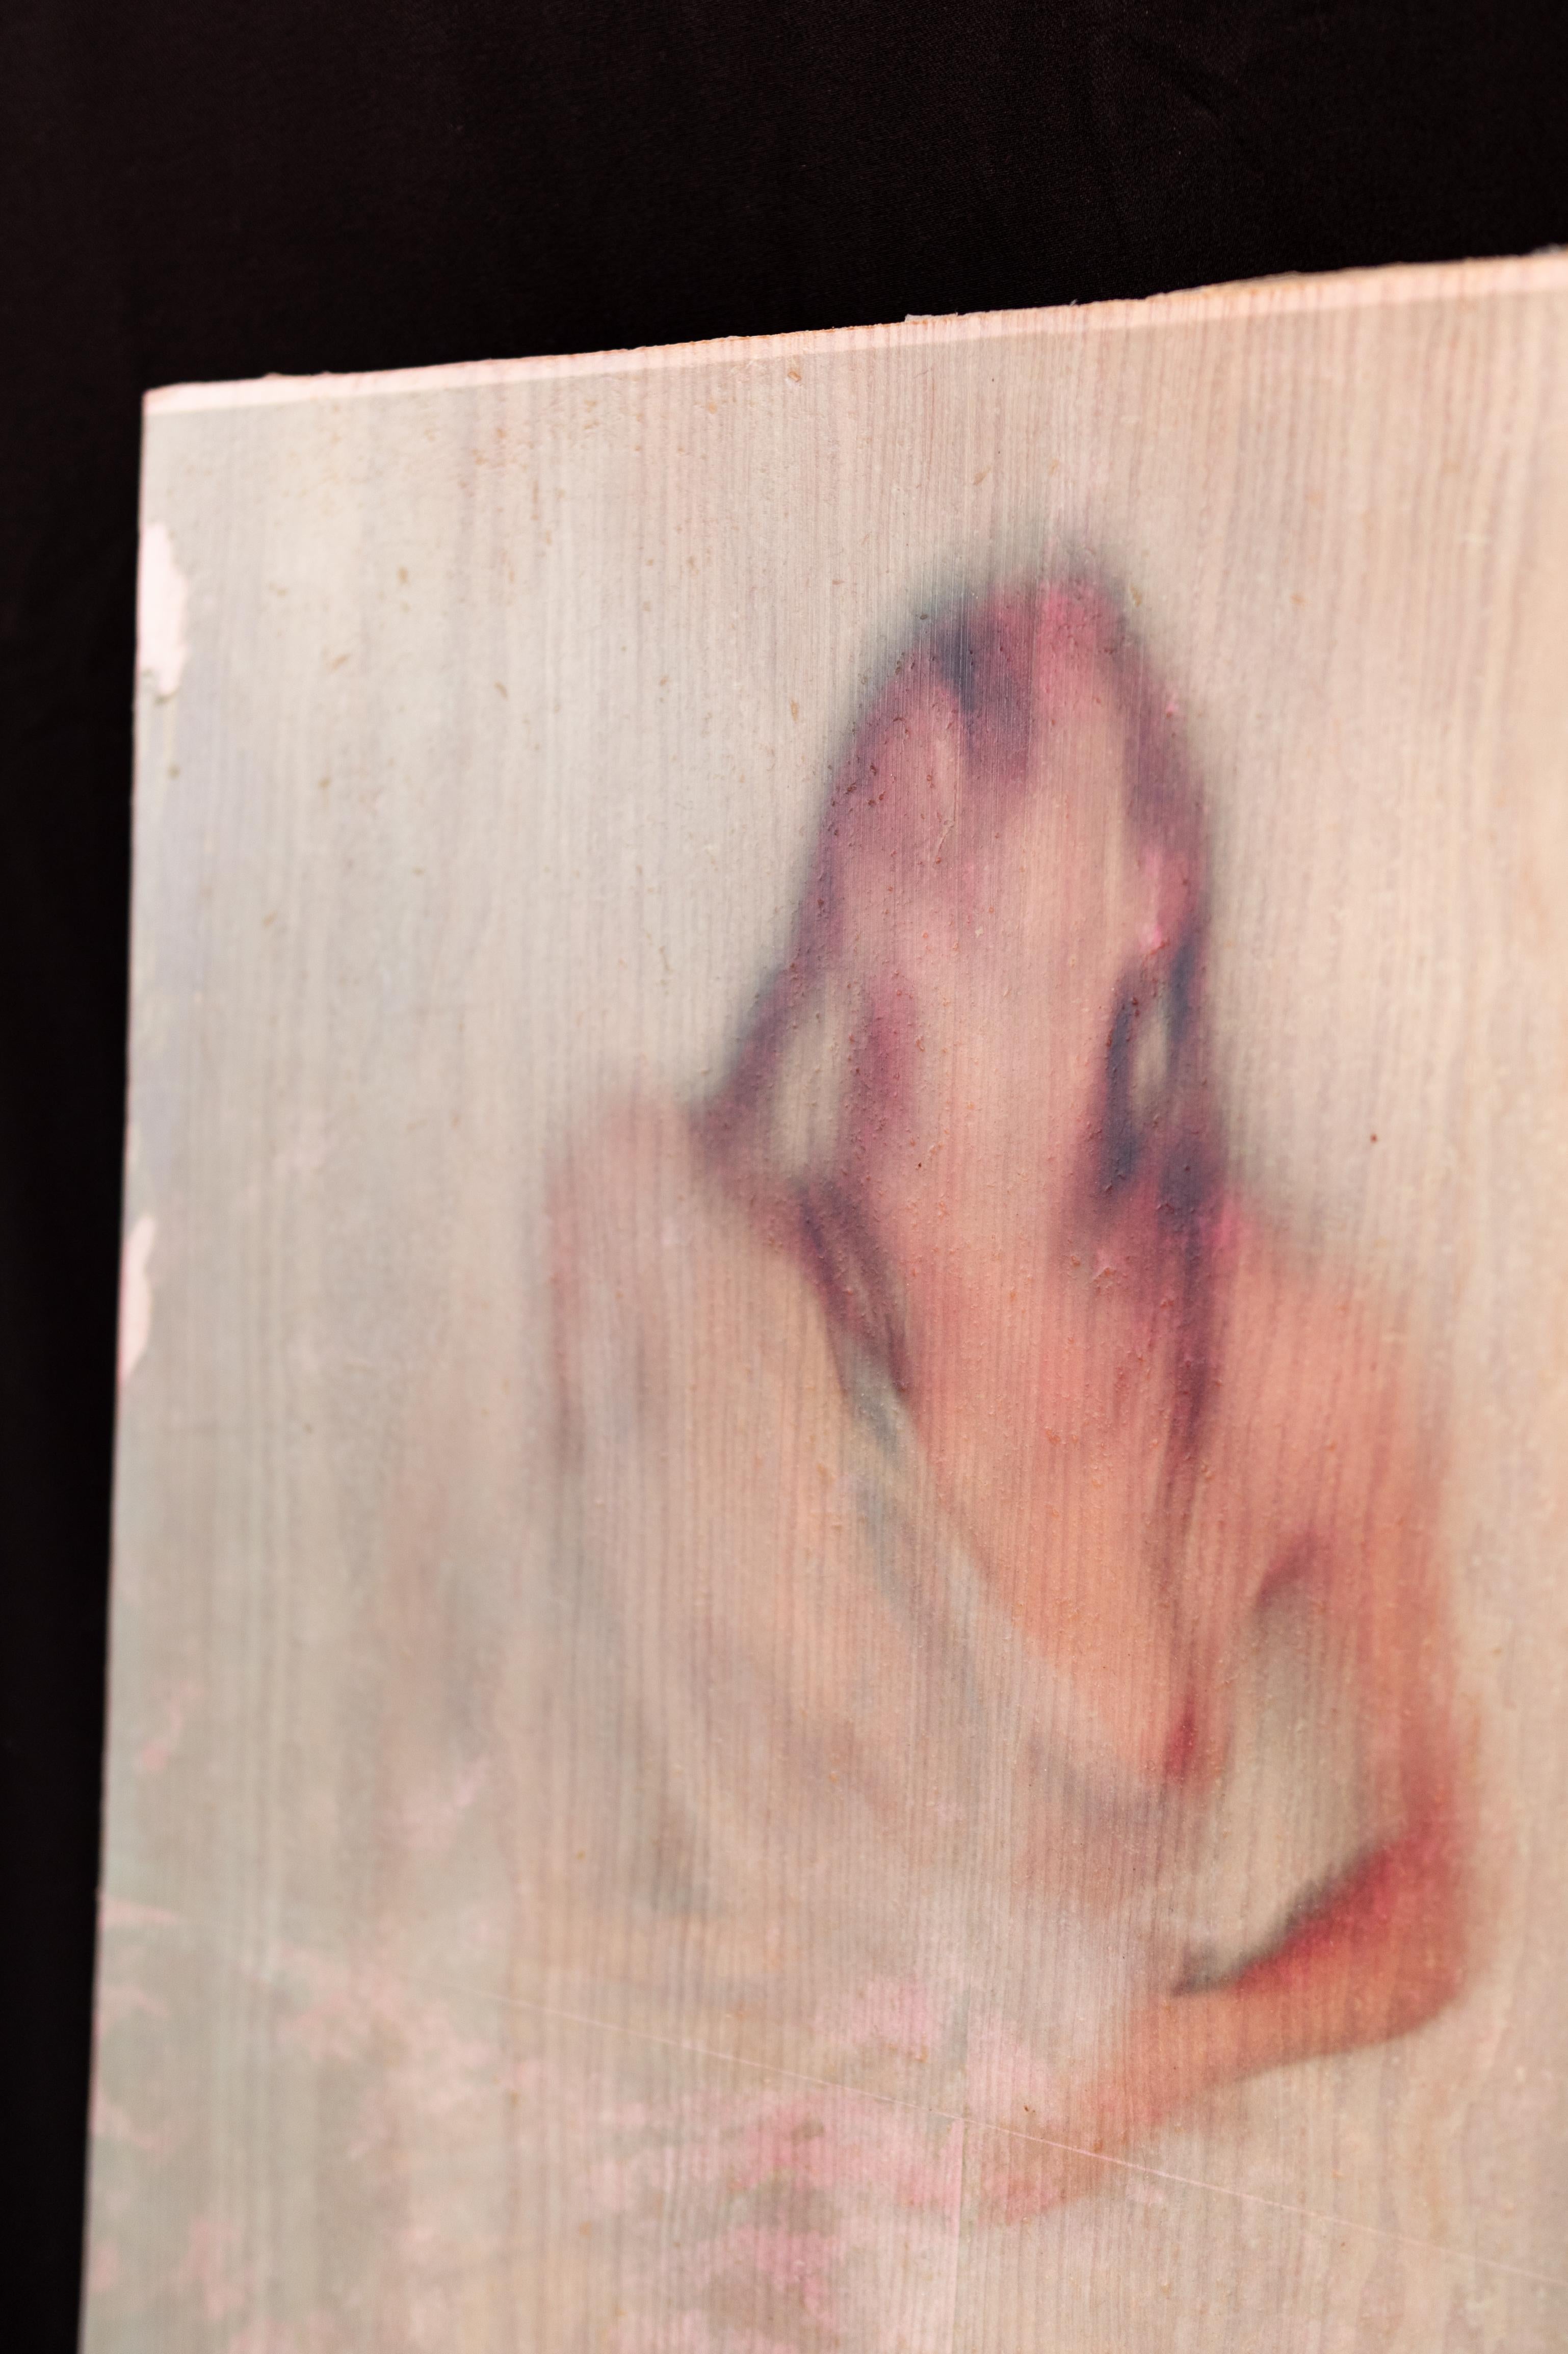 Photography on wooden panel, 'Judith' (dancing lady) (2022), by Maarten Marchau 2